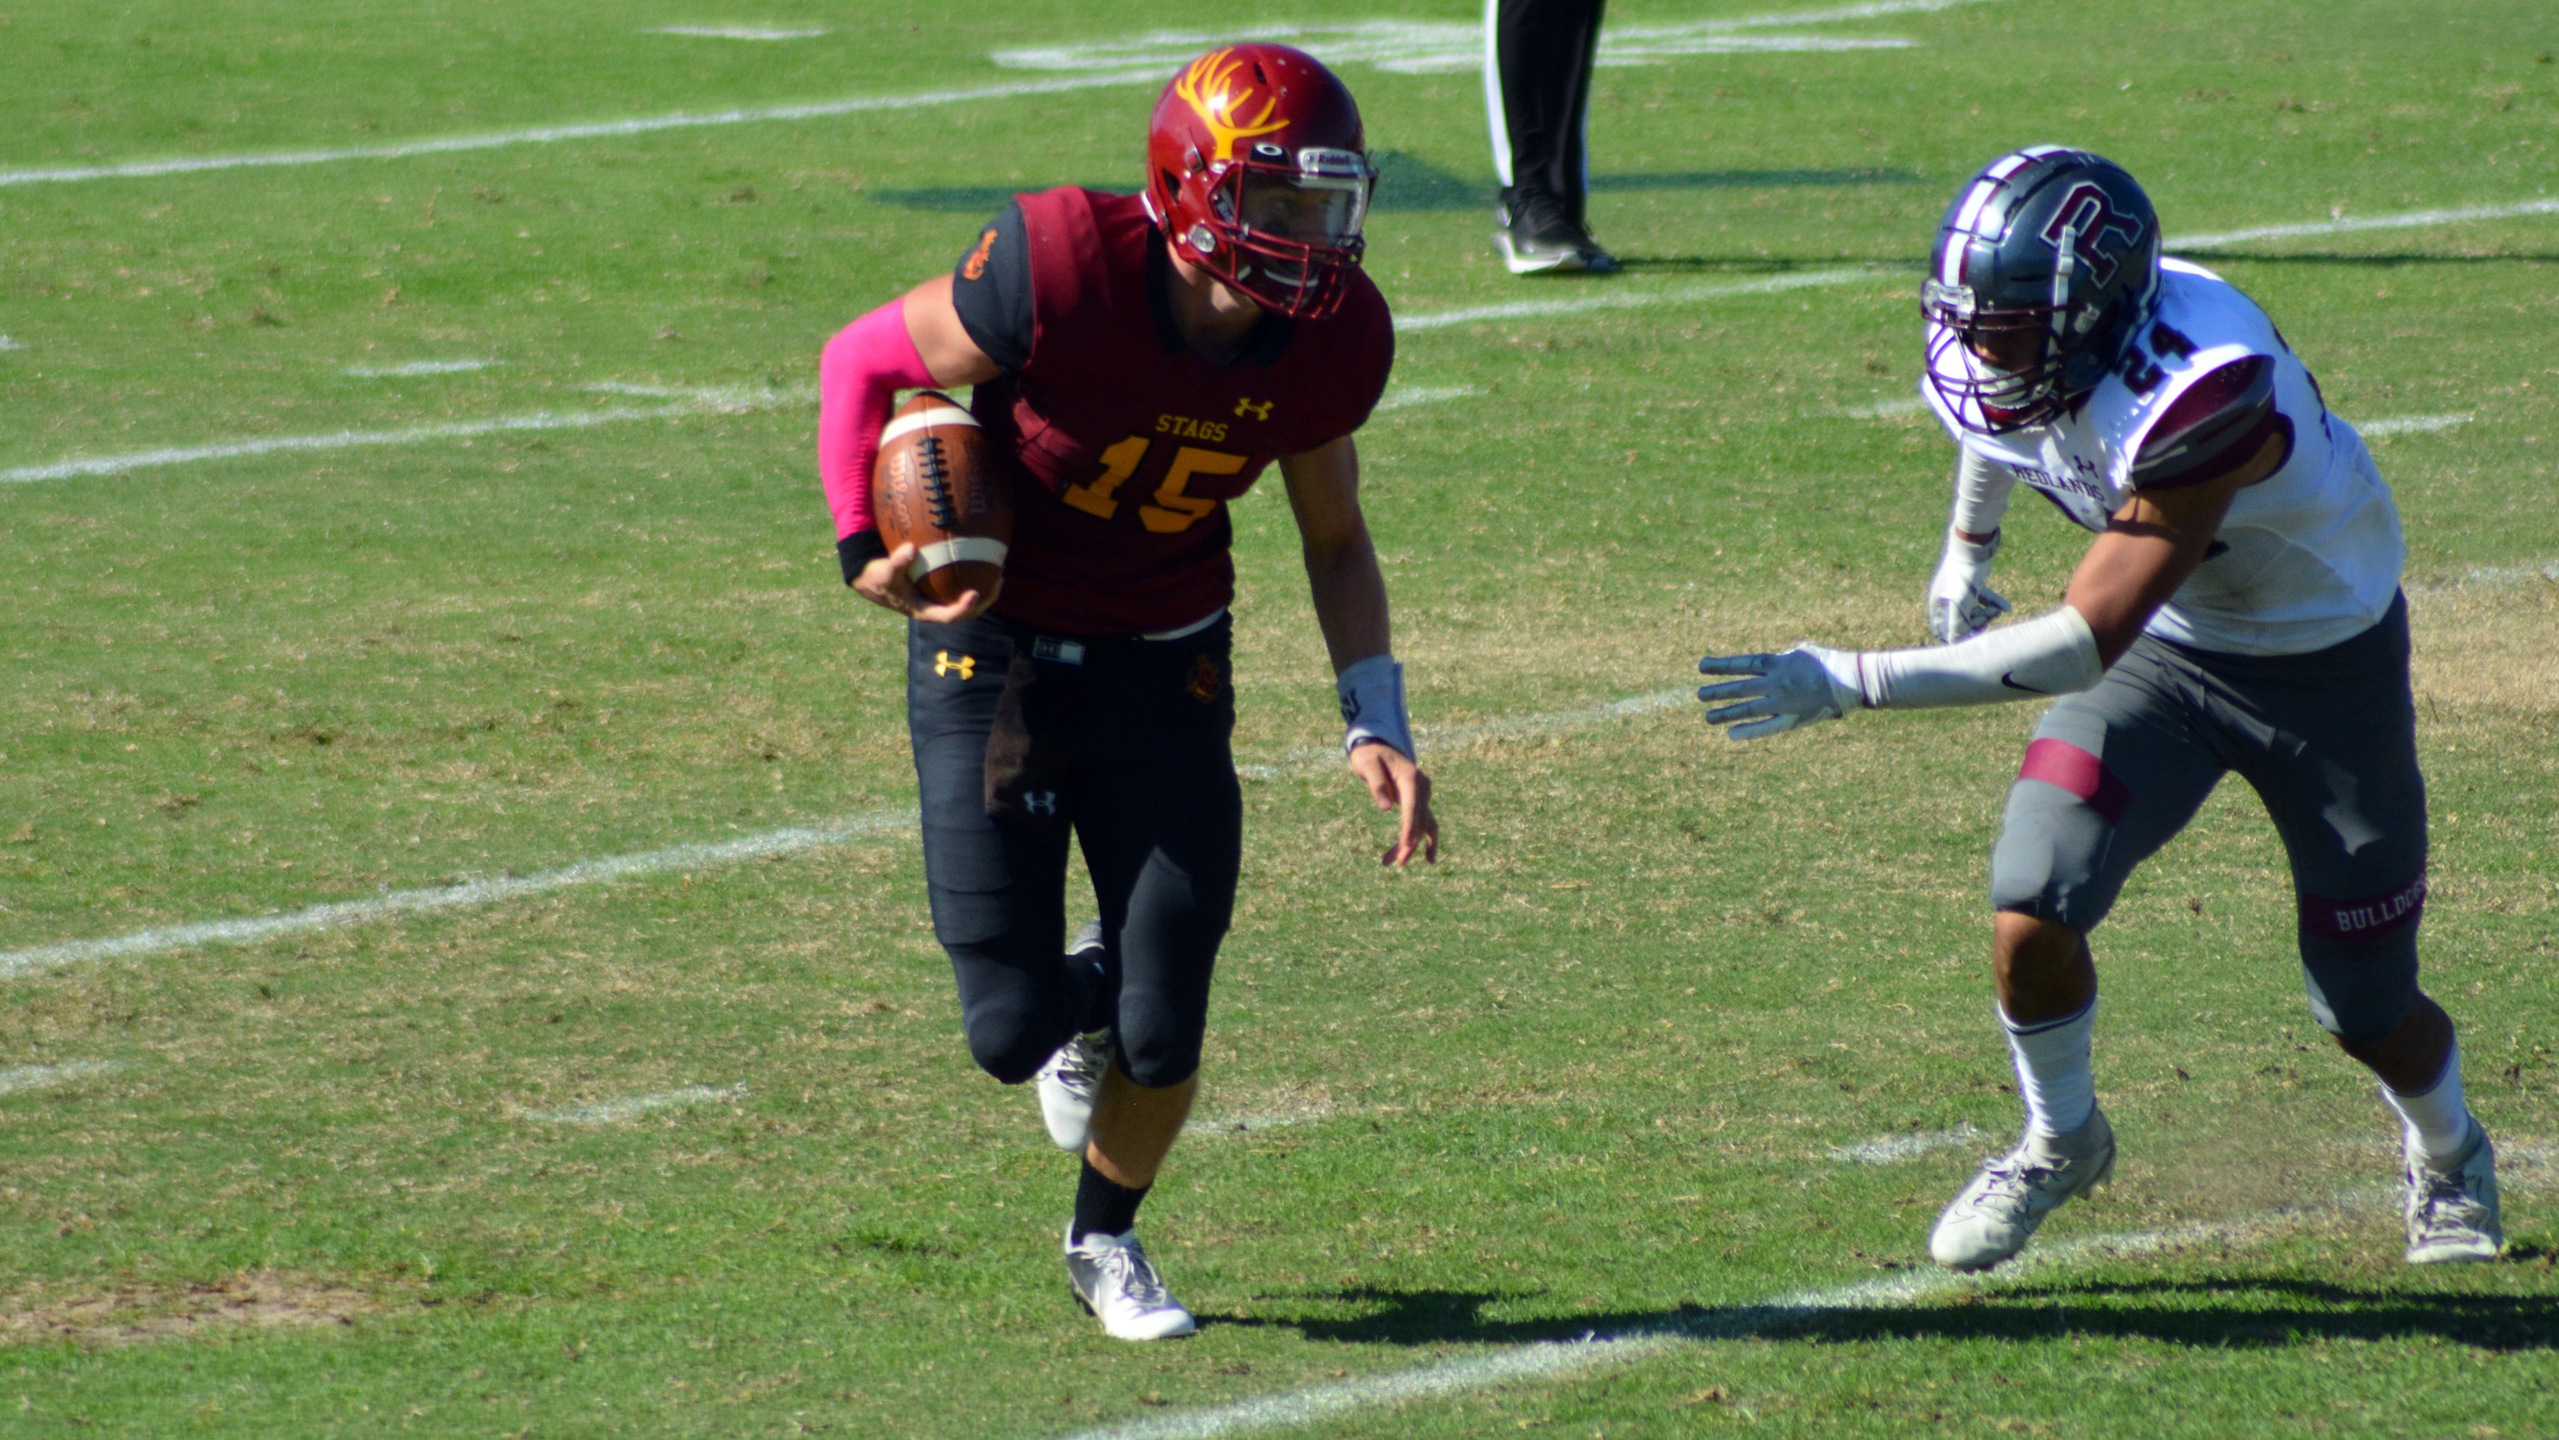 Zach Fogel had 82 rushing yards on the day (photo by Tessa Guerra)